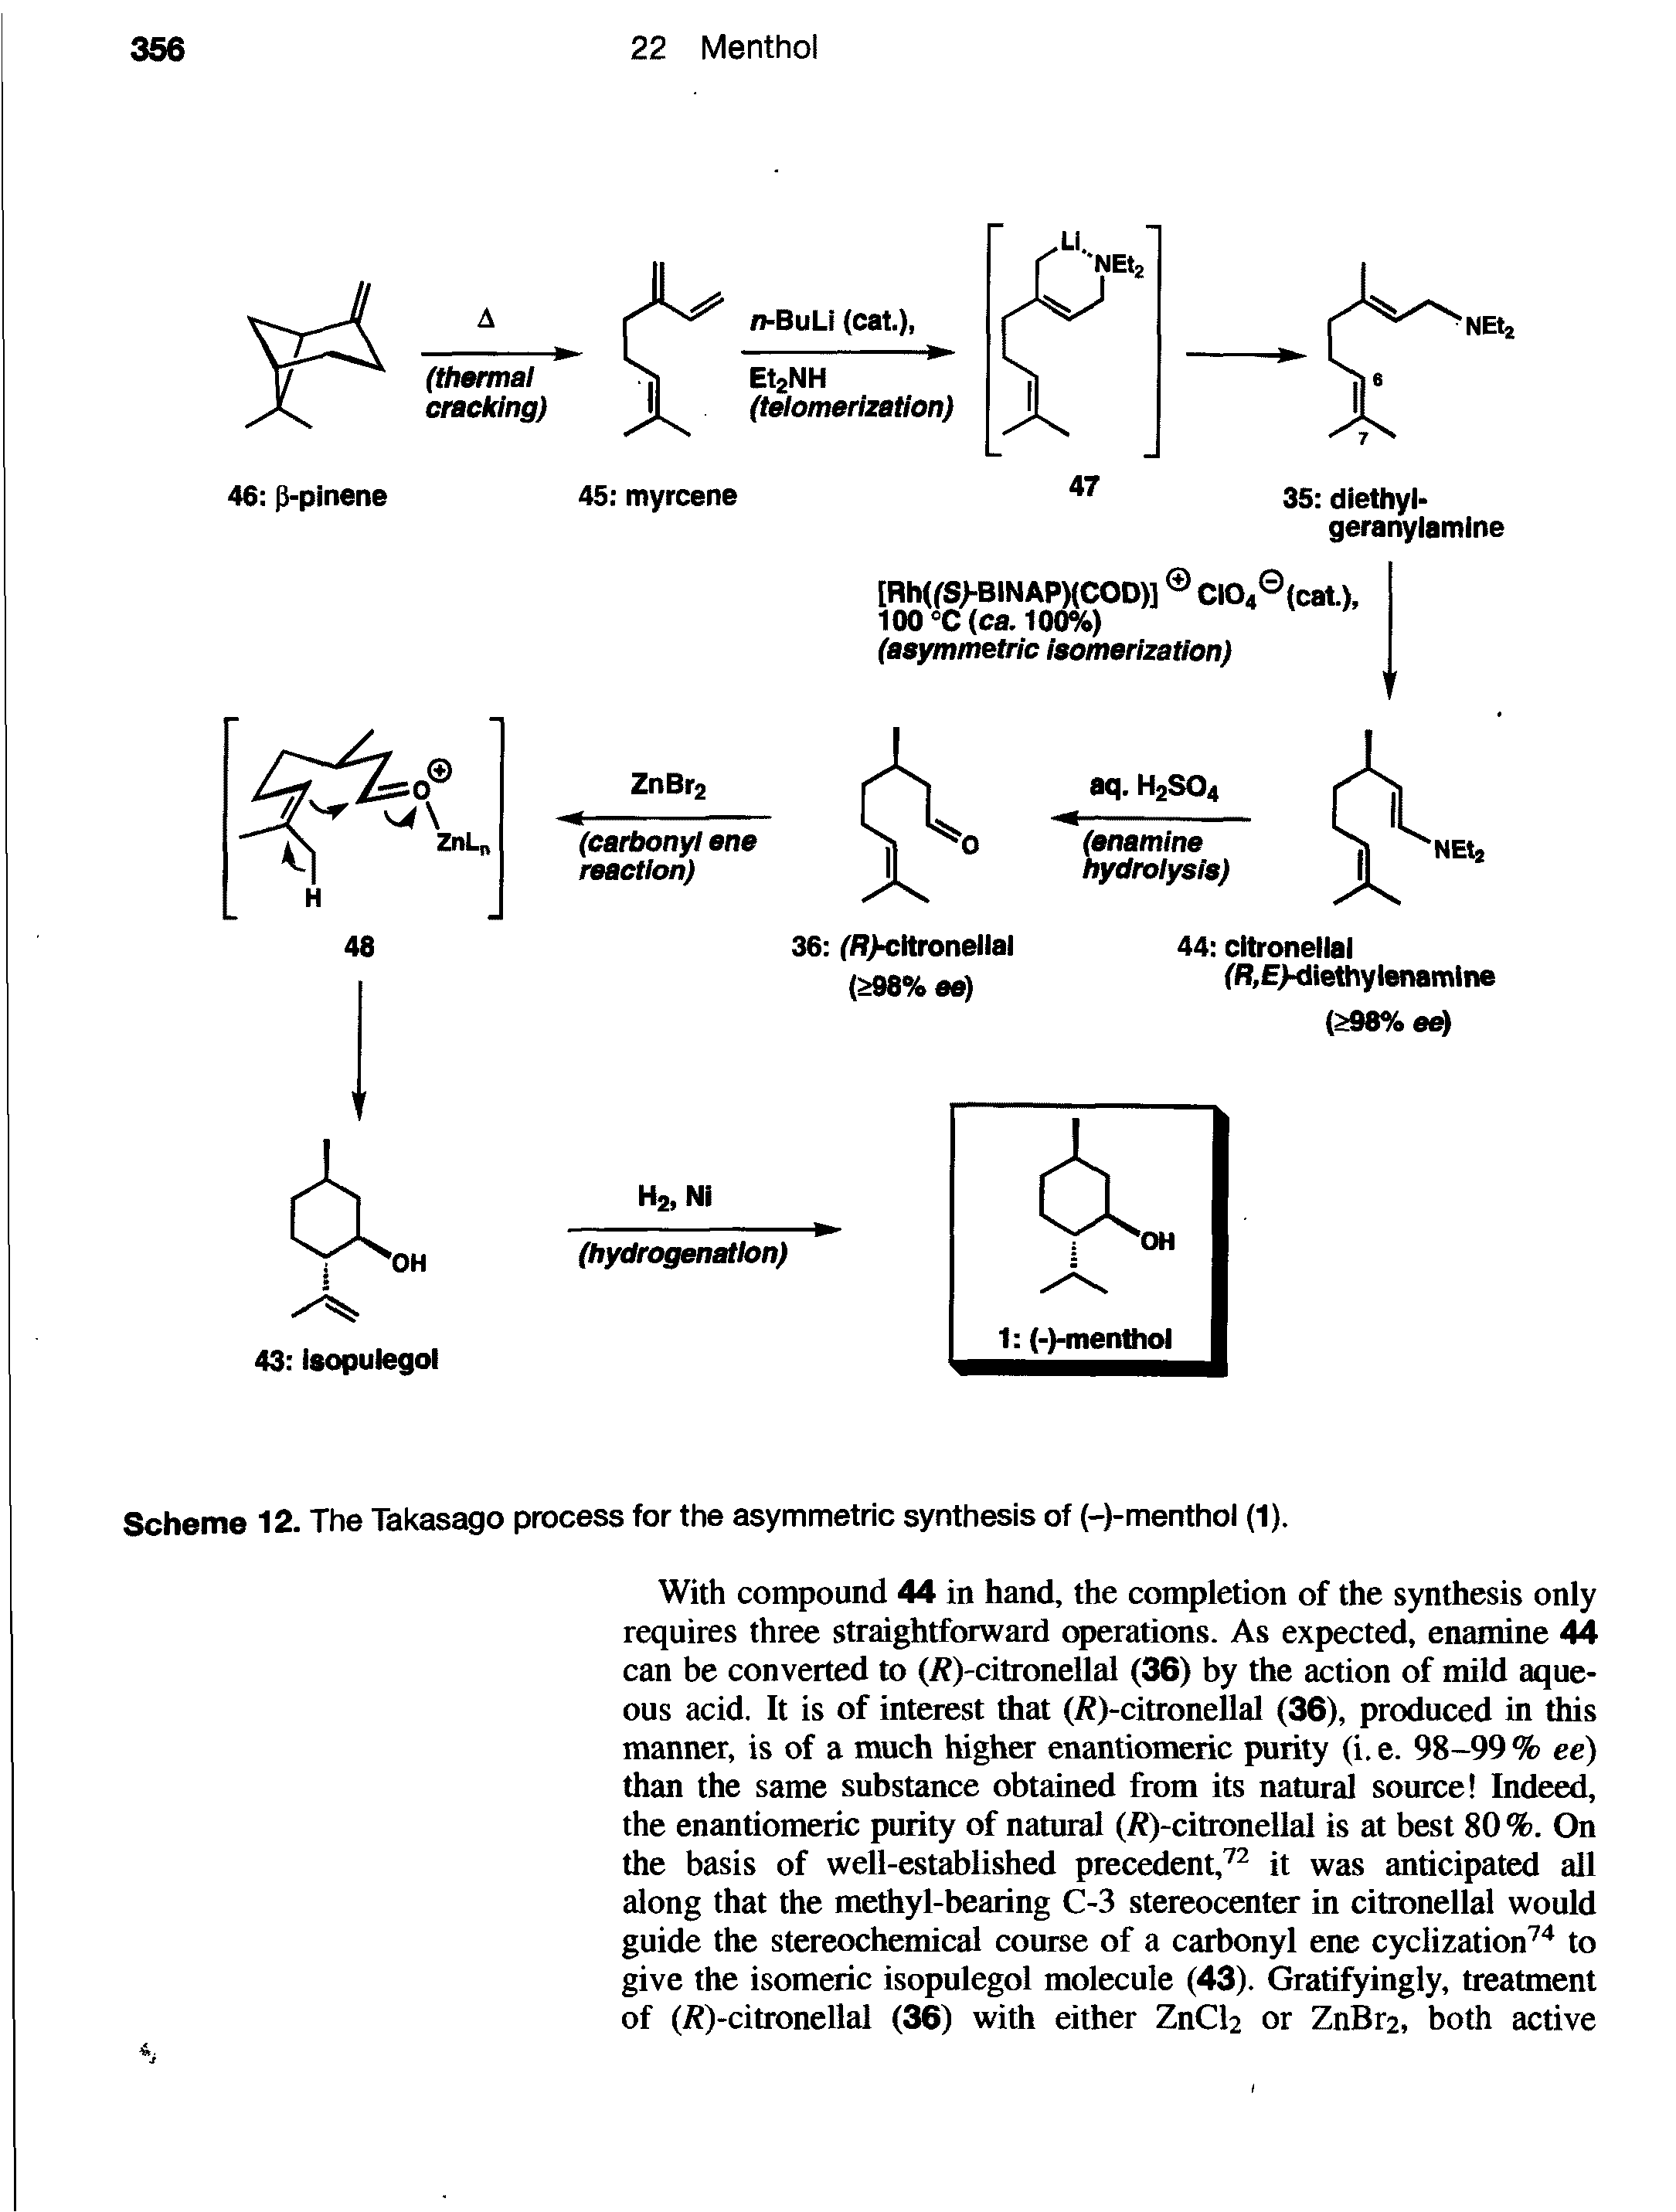 Scheme 12. The Takasago process for the asymmetric synthesis of (-)-menthol (1).